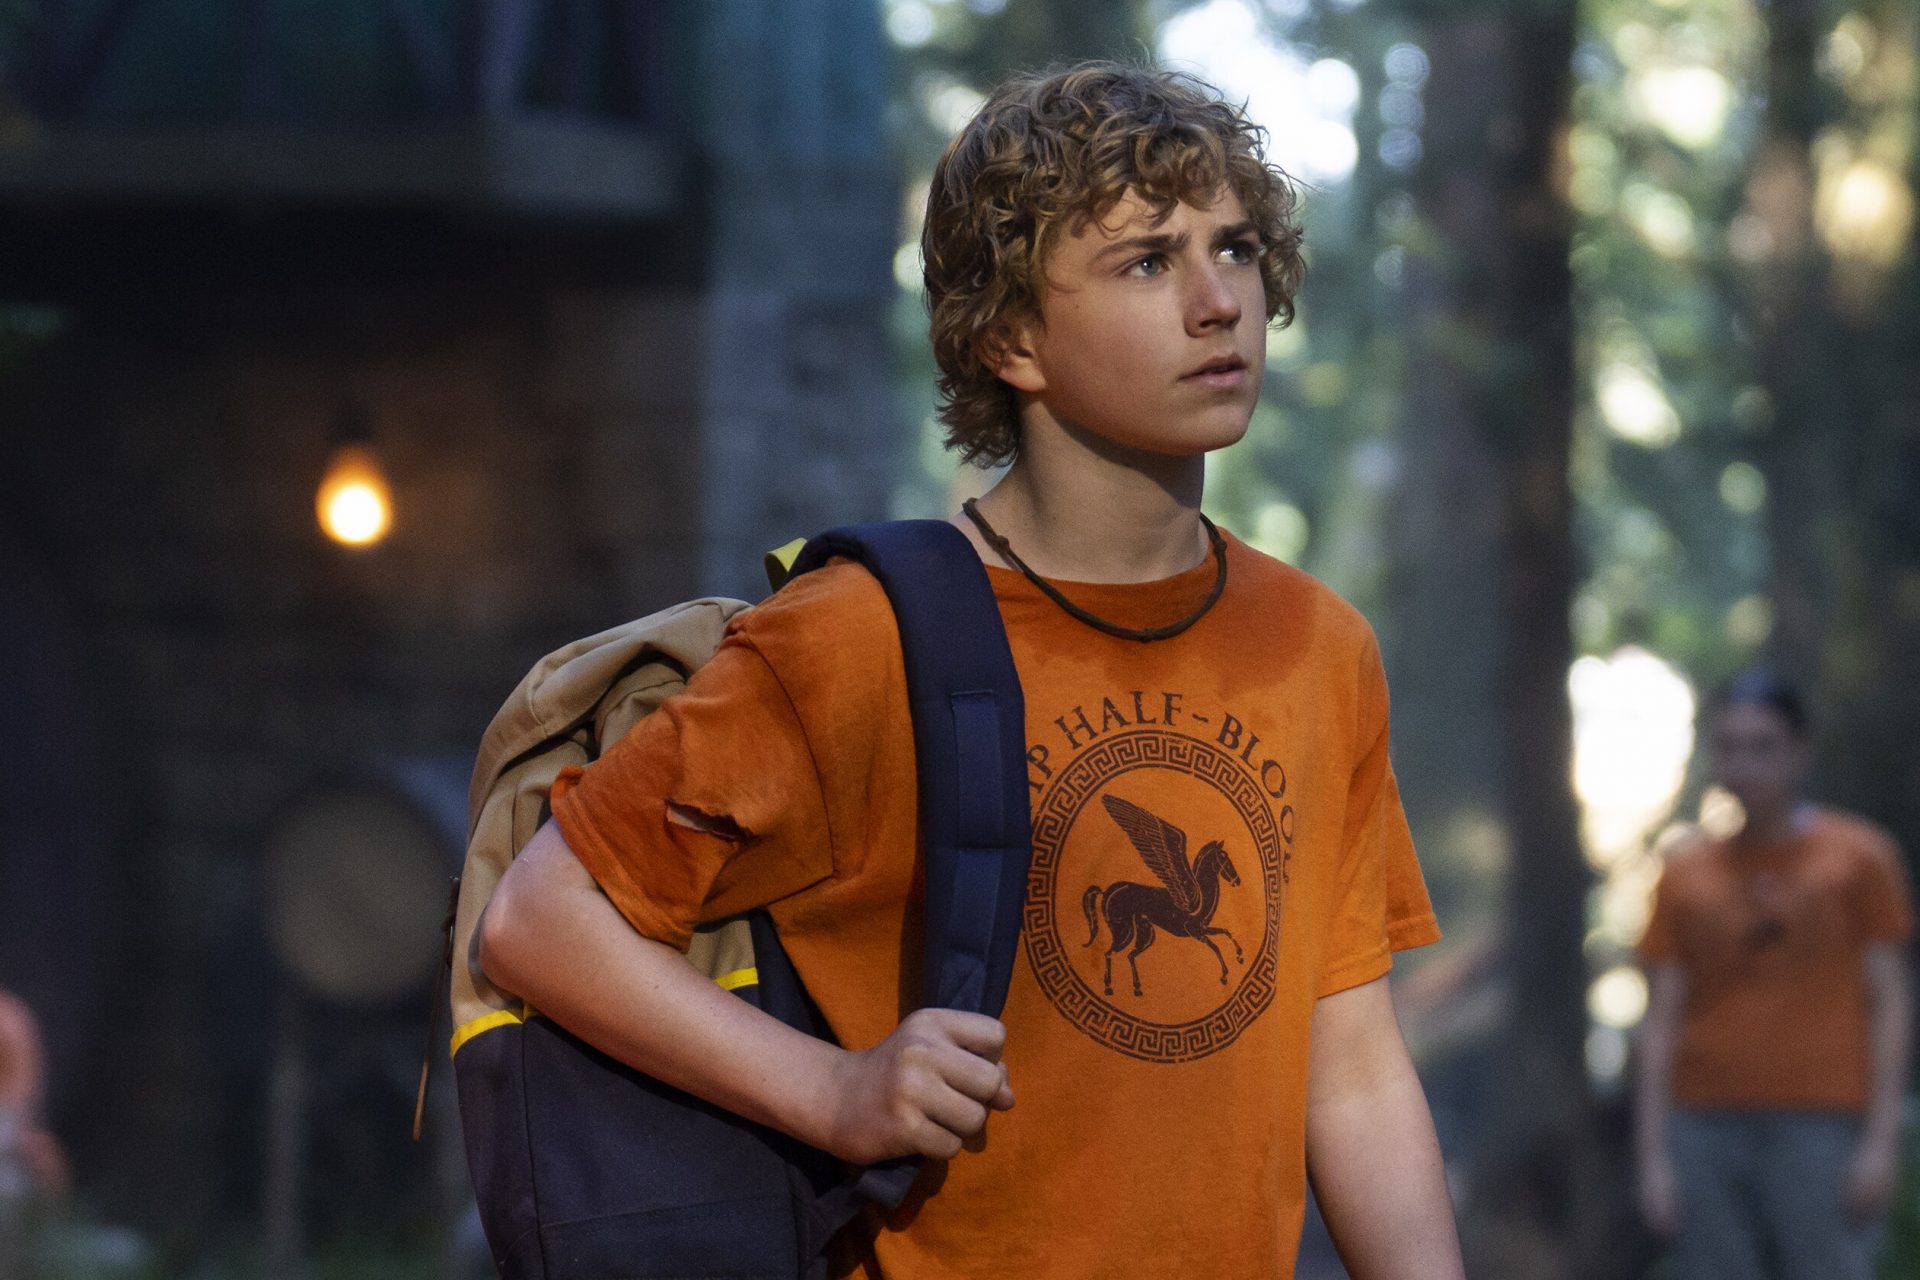 Percy Jackson and the Olympians - December 20th (Disney+)